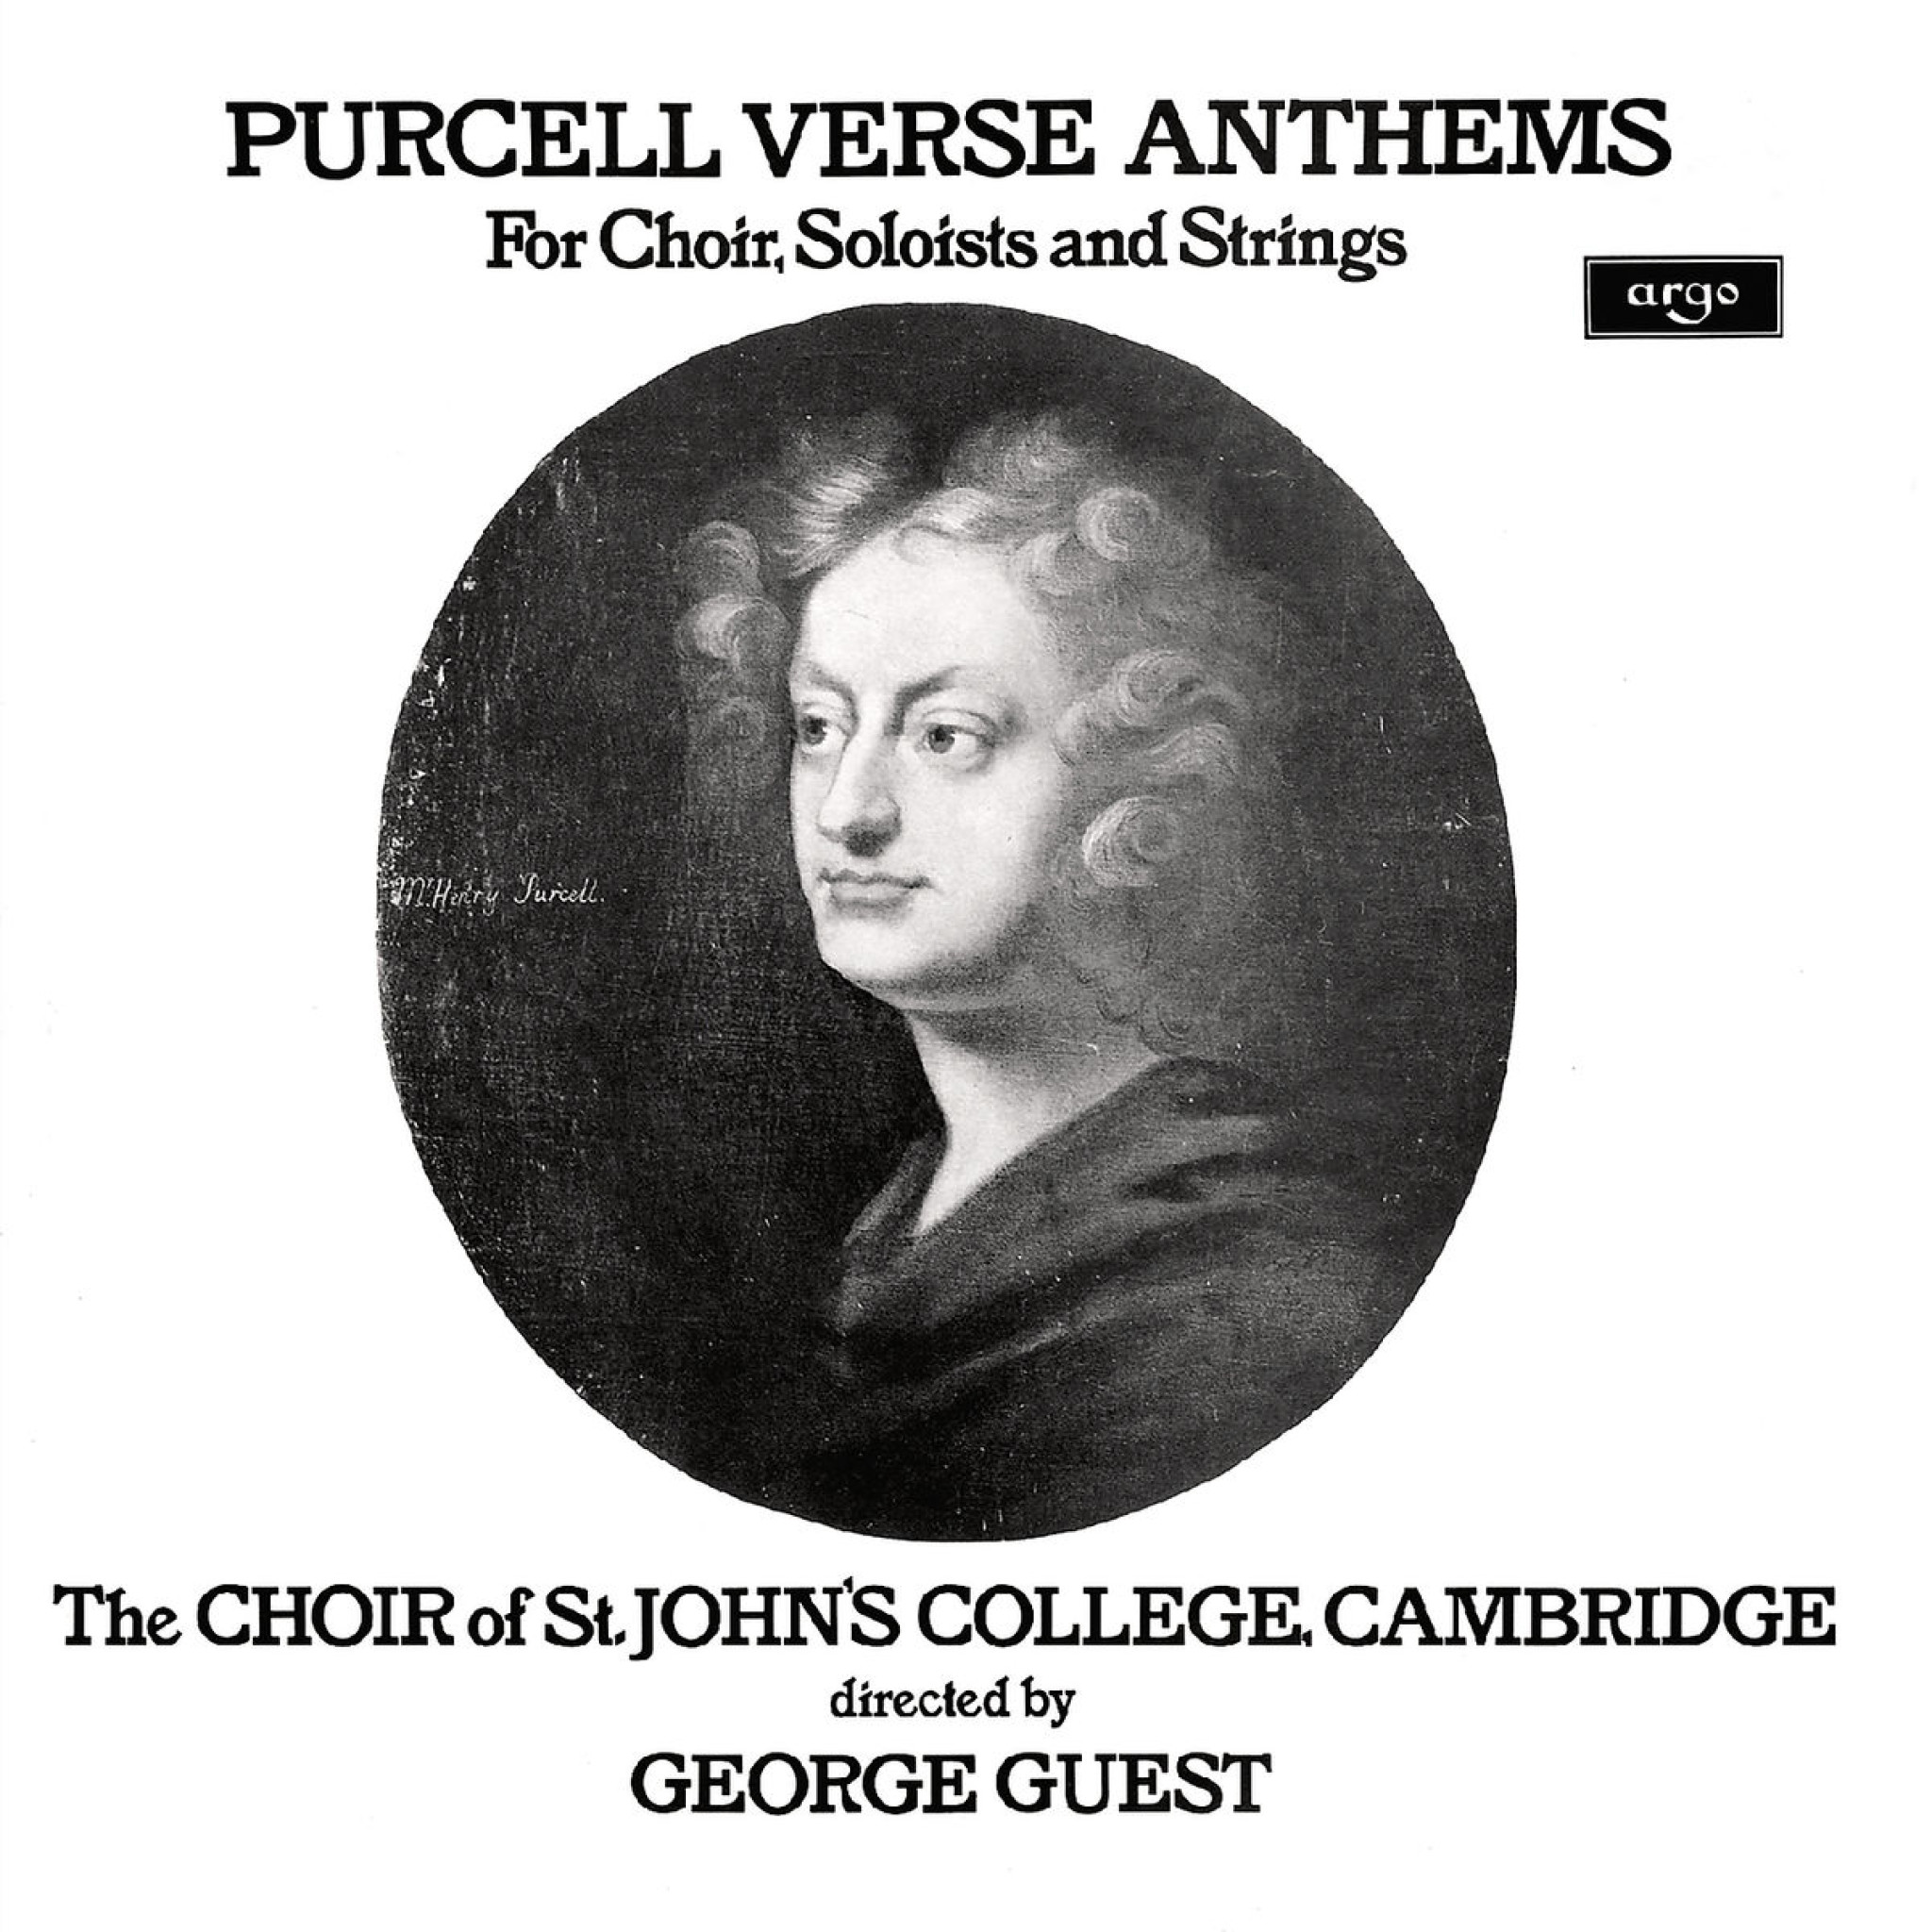 HENRY PURCELL